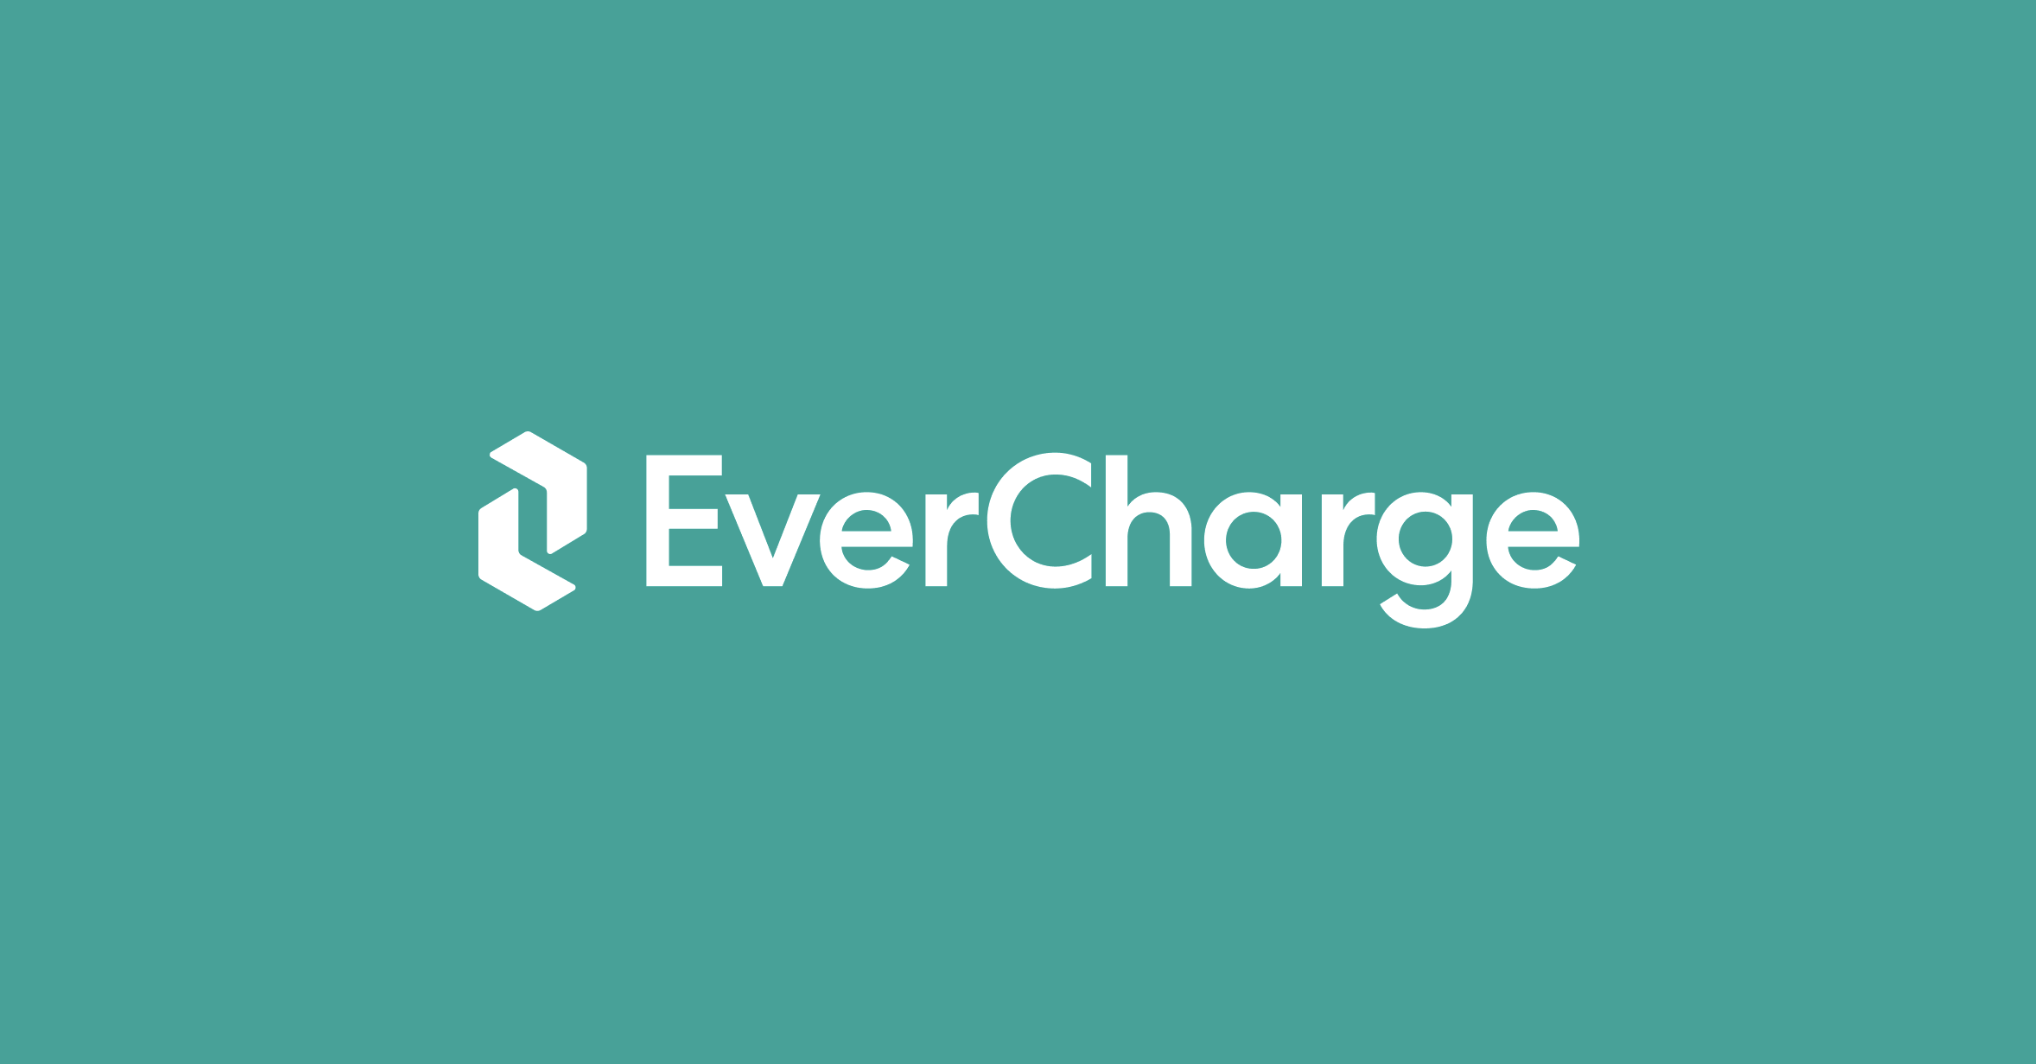 EverCharge Enters Next Growth Phase